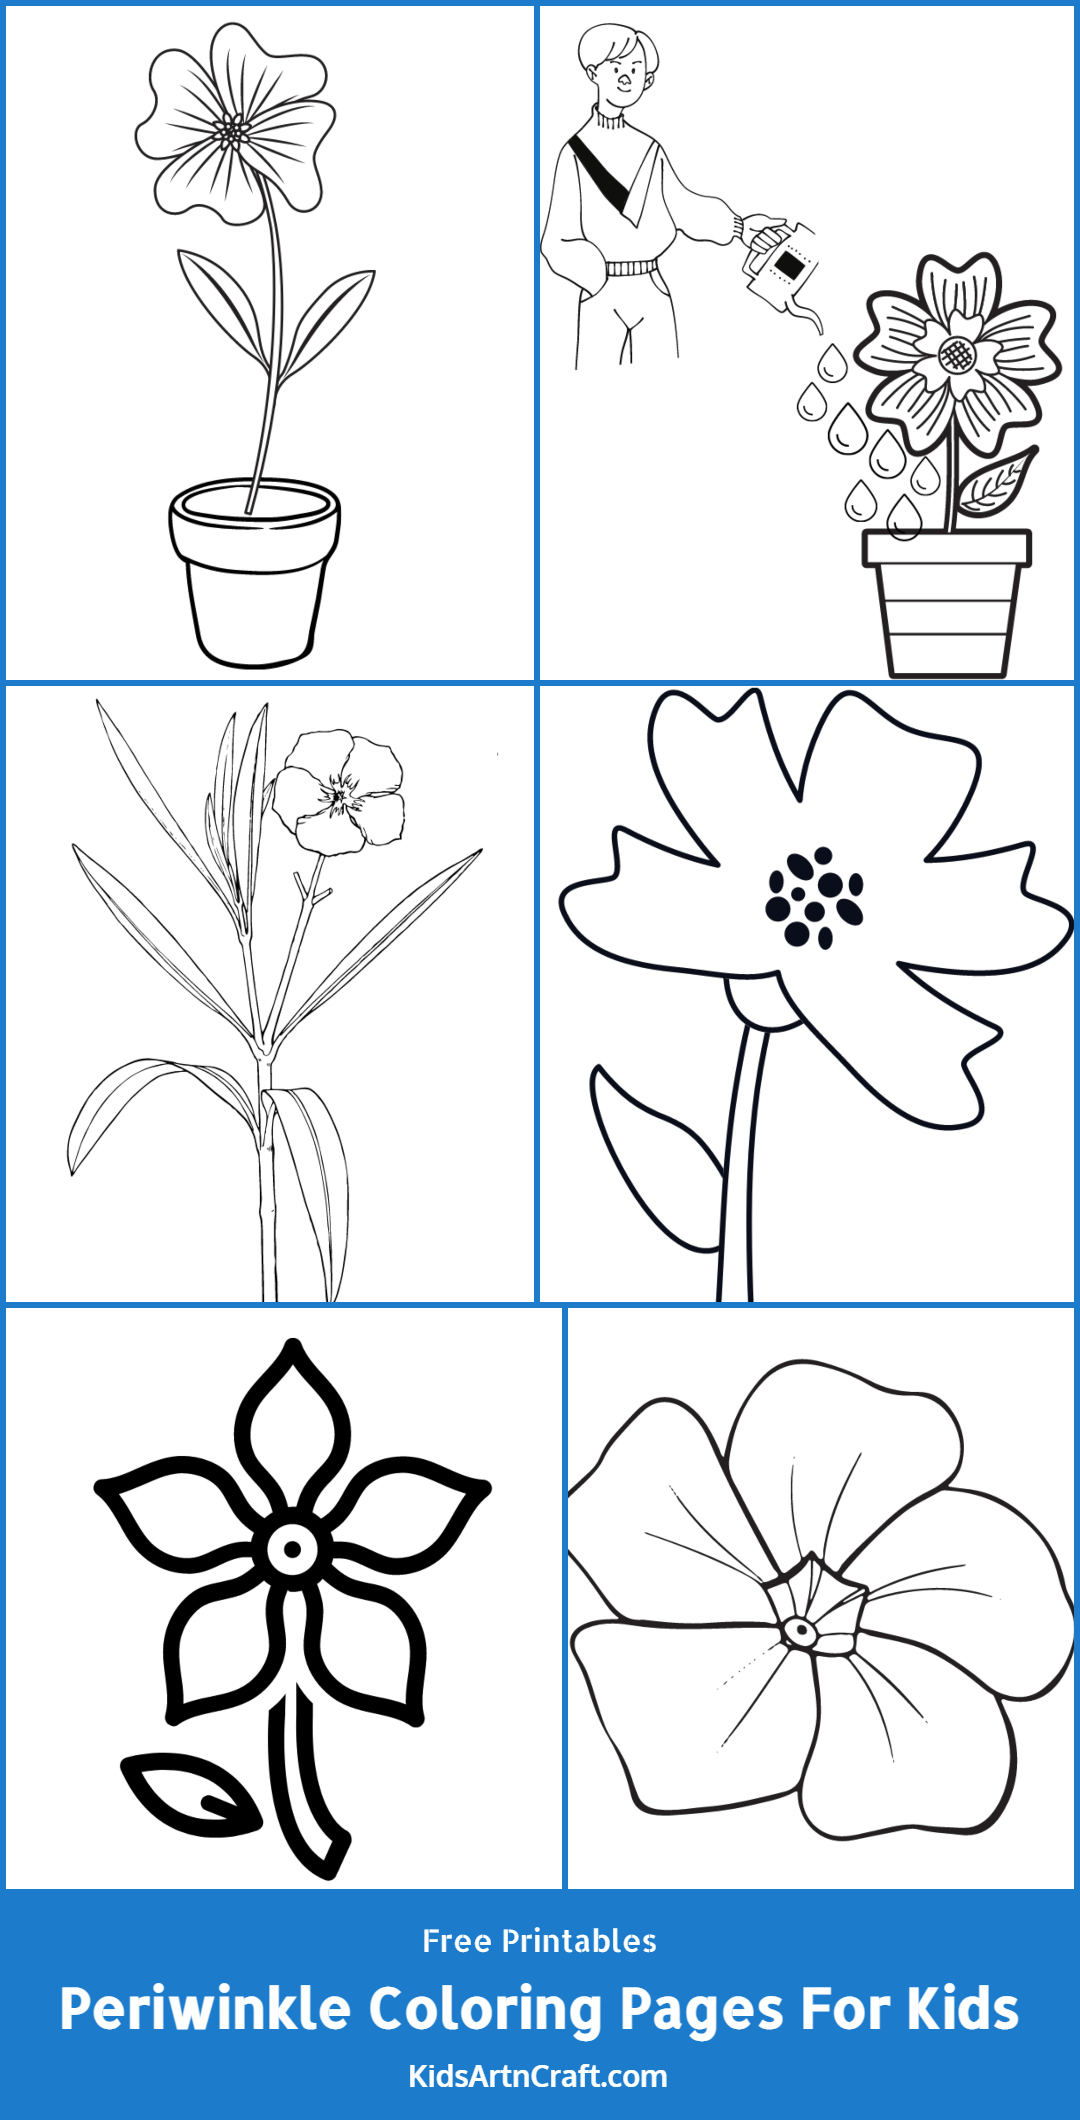 Periwinkle Coloring Pages For Kids – Free Printables